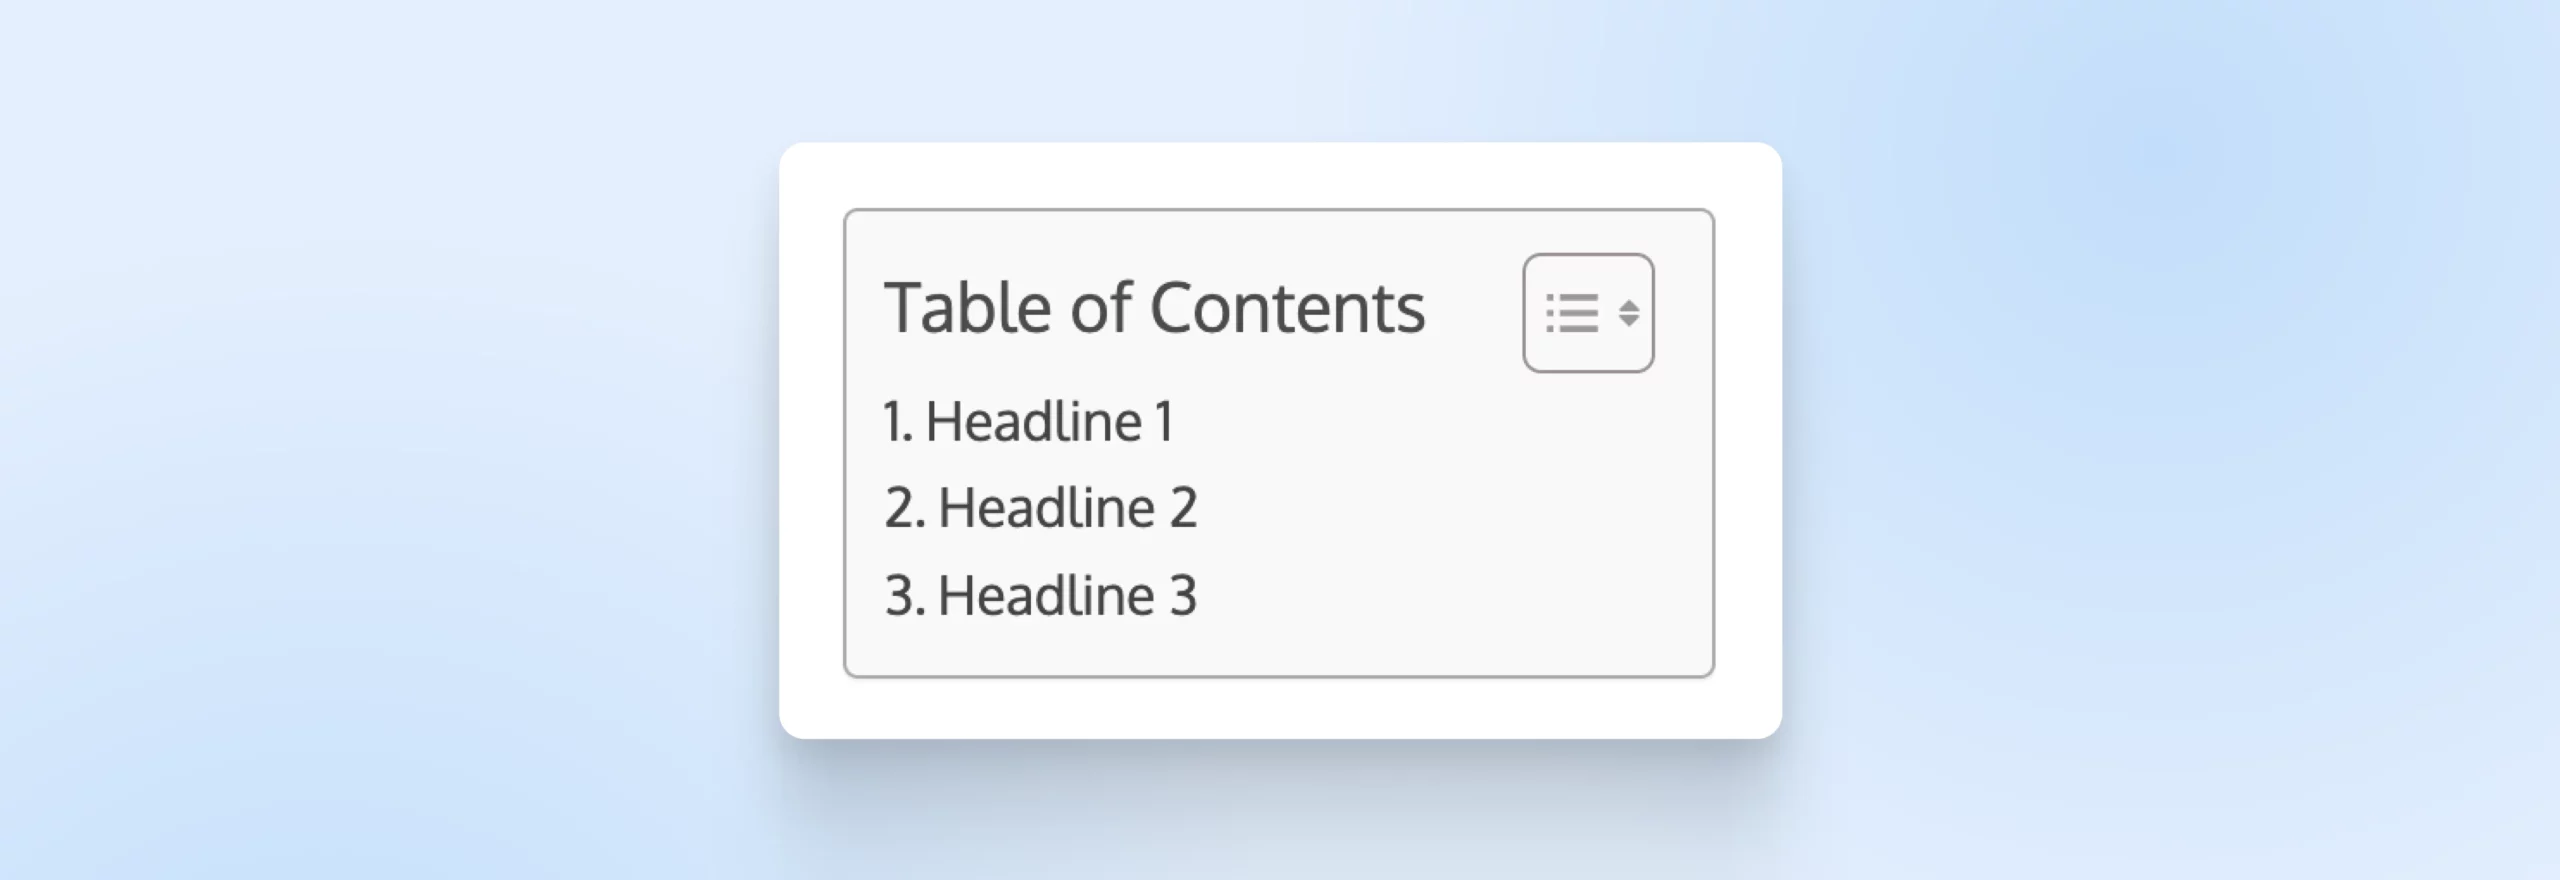 screenshot showing the view of Table of contents with 1. Headline 1, 2. Headline 2, 3. Headline 3 formatted